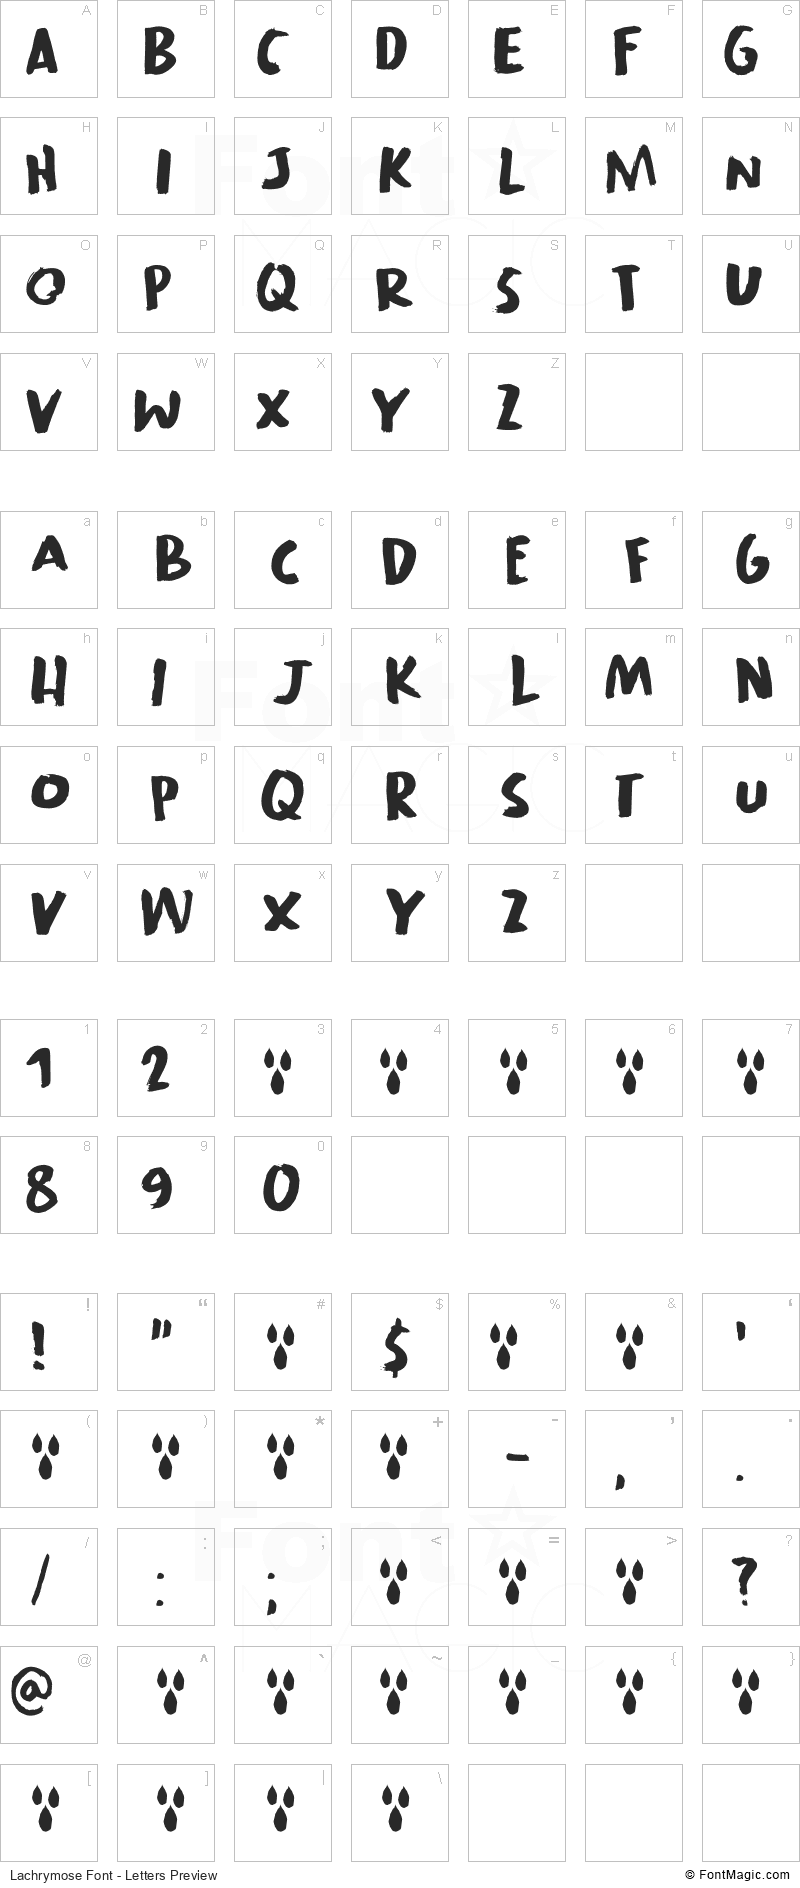 Lachrymose Font - All Latters Preview Chart